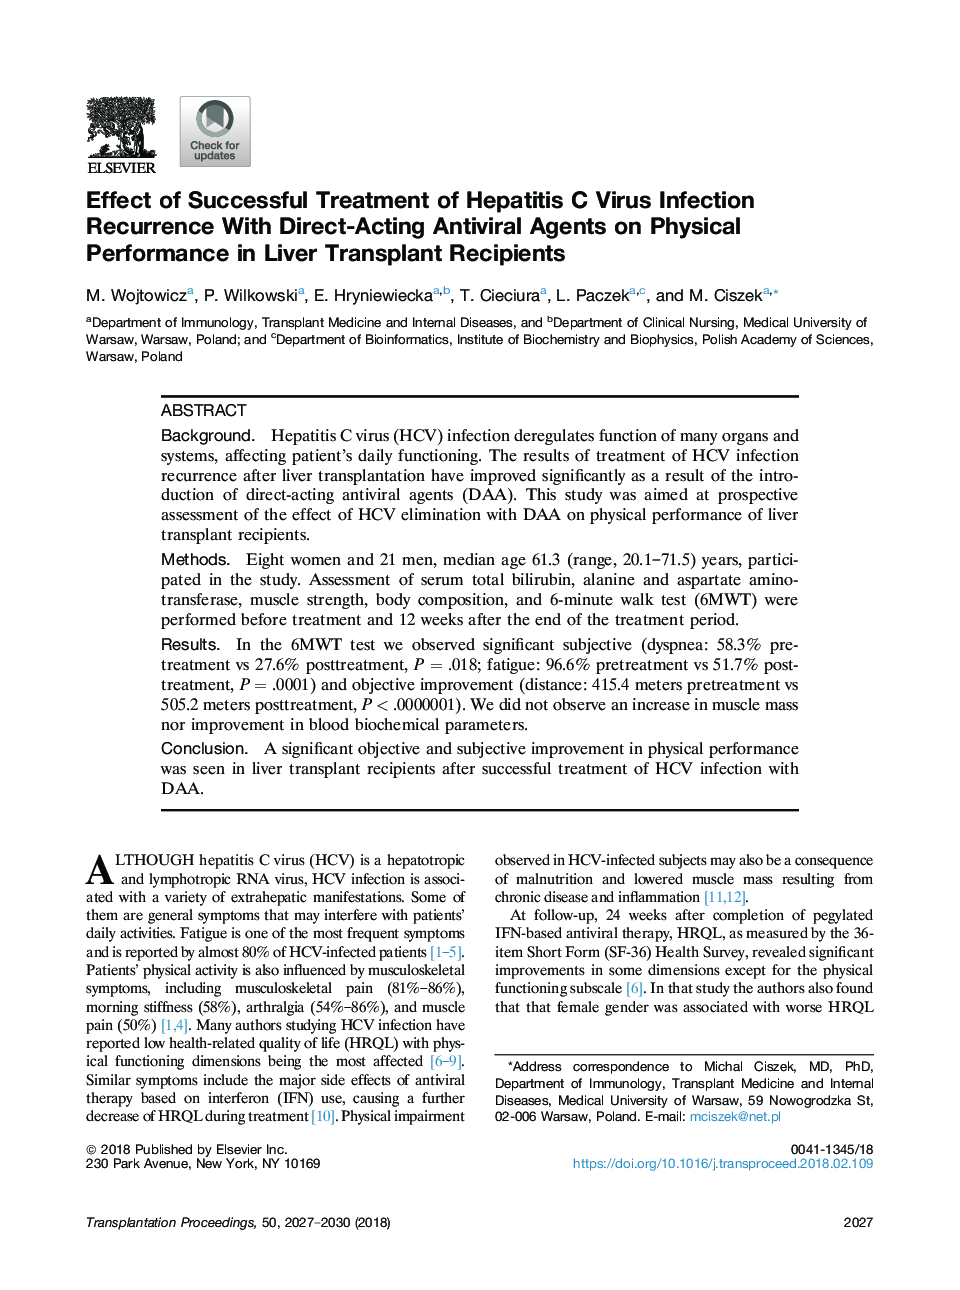 Effect of Successful Treatment of Hepatitis C Virus Infection Recurrence With Direct-Acting Antiviral Agents on Physical Performance in Liver Transplant Recipients